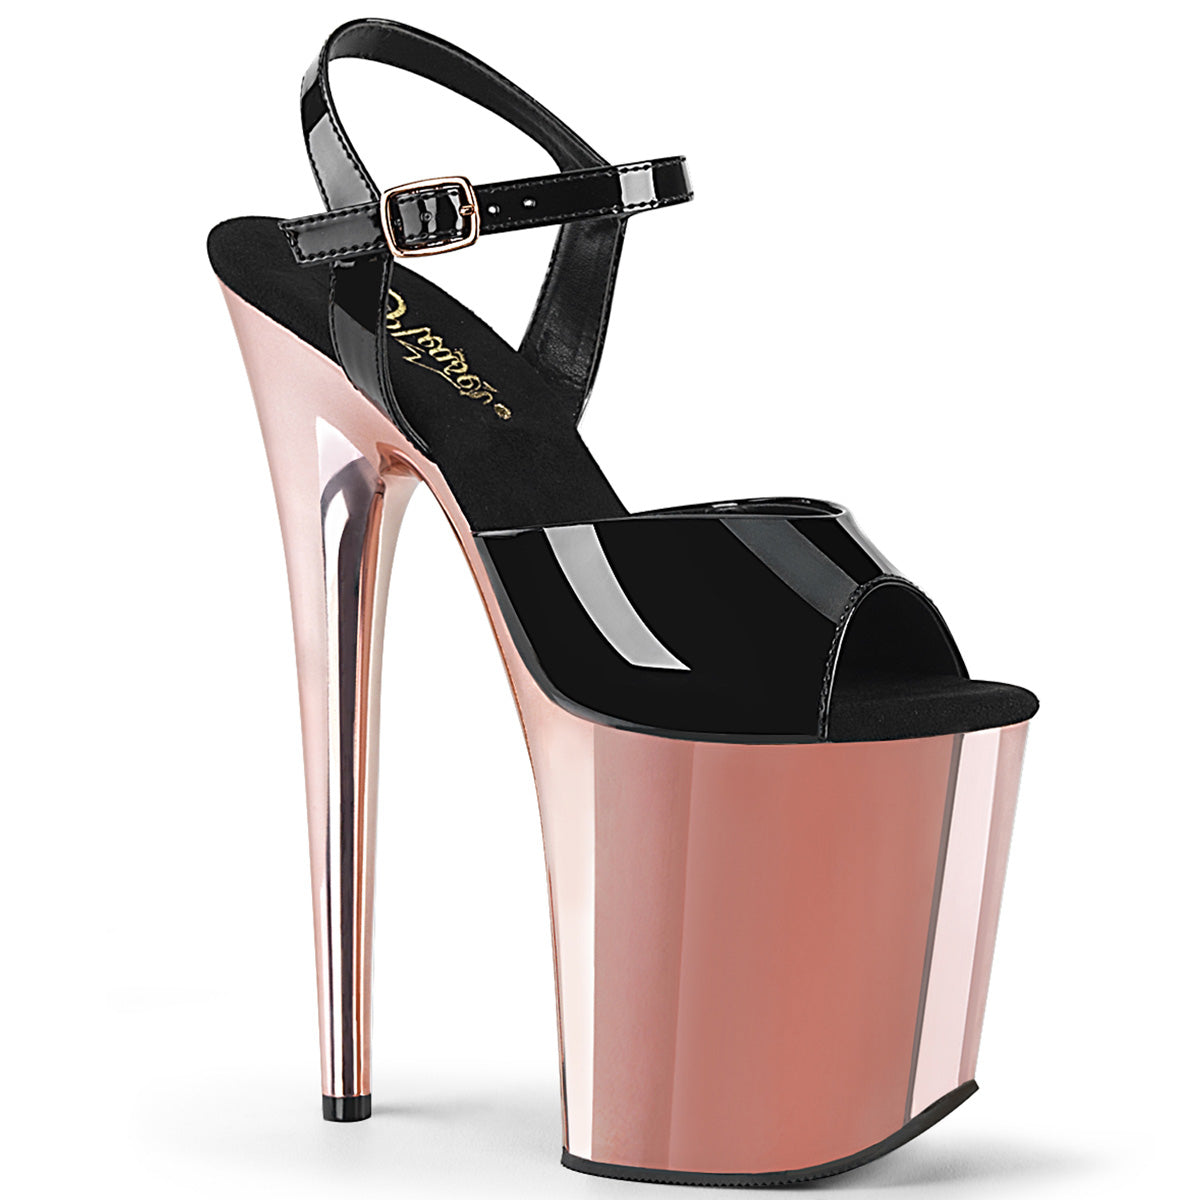 FLAMINGO-809 Pleaser 8" Heel Black Rose Gold Strippers Shoes-Pleaser- Sexy Shoes